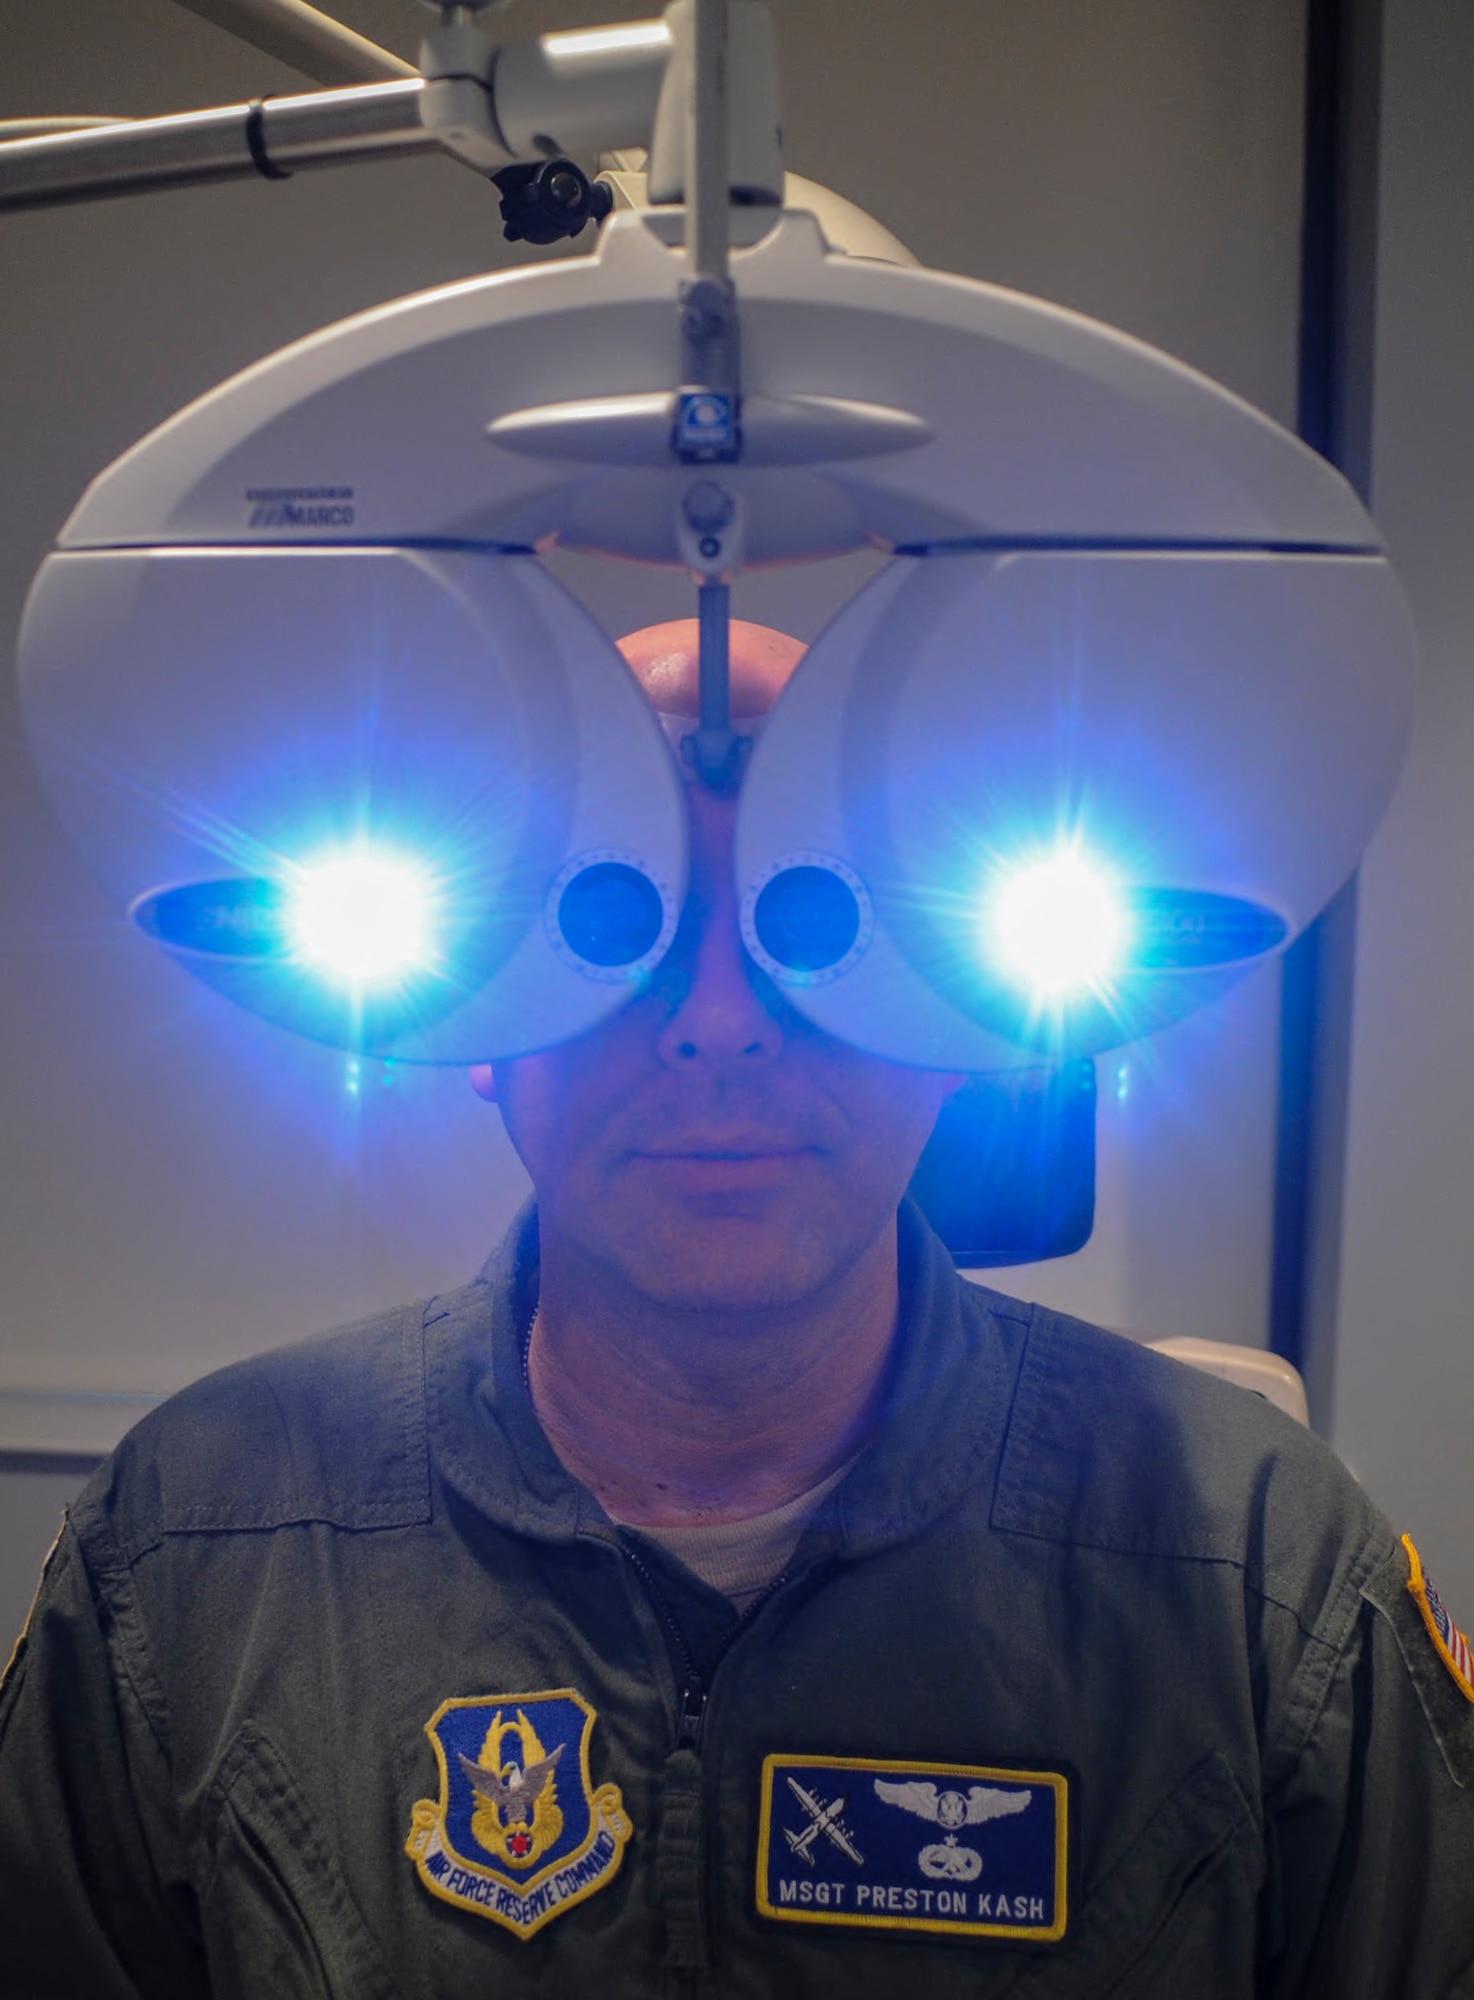 Master Sgt. Preston Kash, a 22nd Air Force Detachment 1 flight engineer, has his vision capability tested with a phoropter during an eye examination June 30, 2014, at Little Rock Air Force Base, Ark. Examples of things evaluated during a routine eye exam include eye pressure, depth perception, eye muscle movement and the condition of the retinas. (U.S. Air Force photo by Airman 1st Class Harry Brexel)